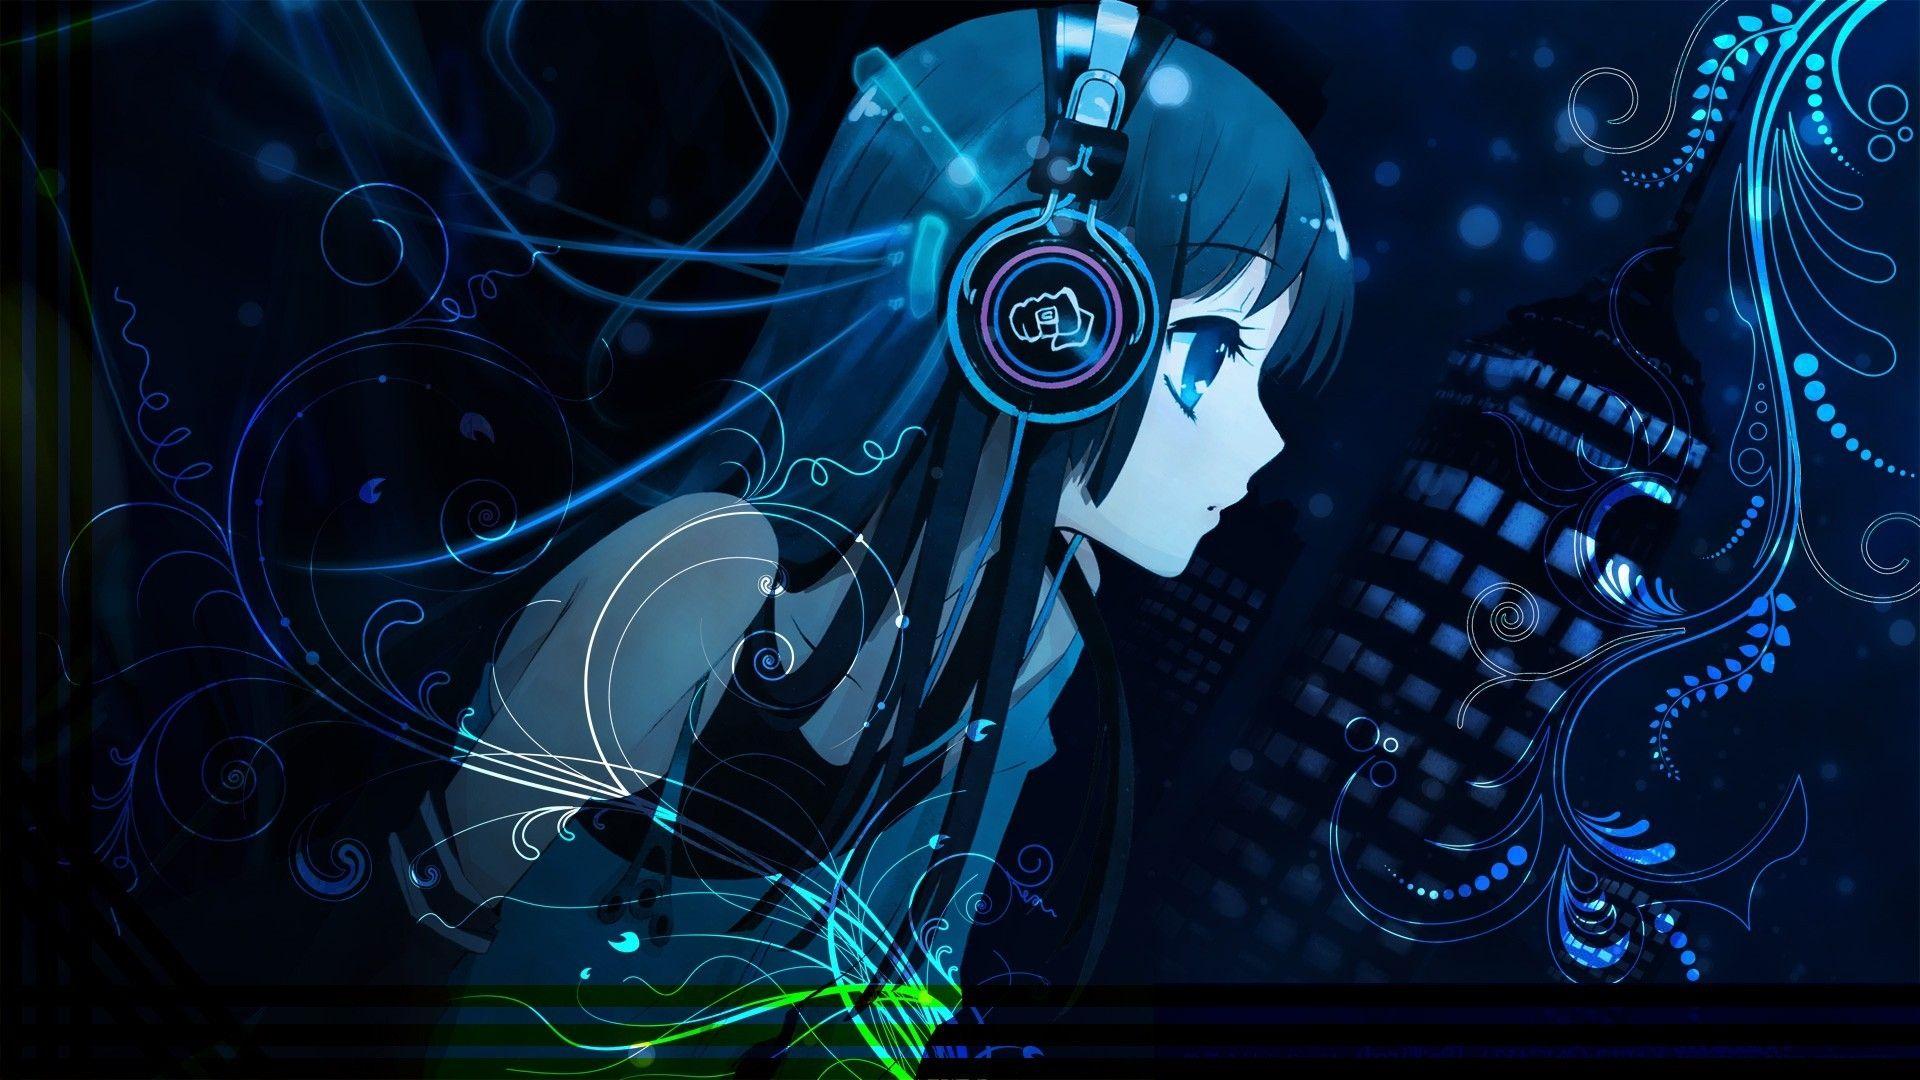 Fresh Anime Cool Girl with Headphones Wallpaper Gallery